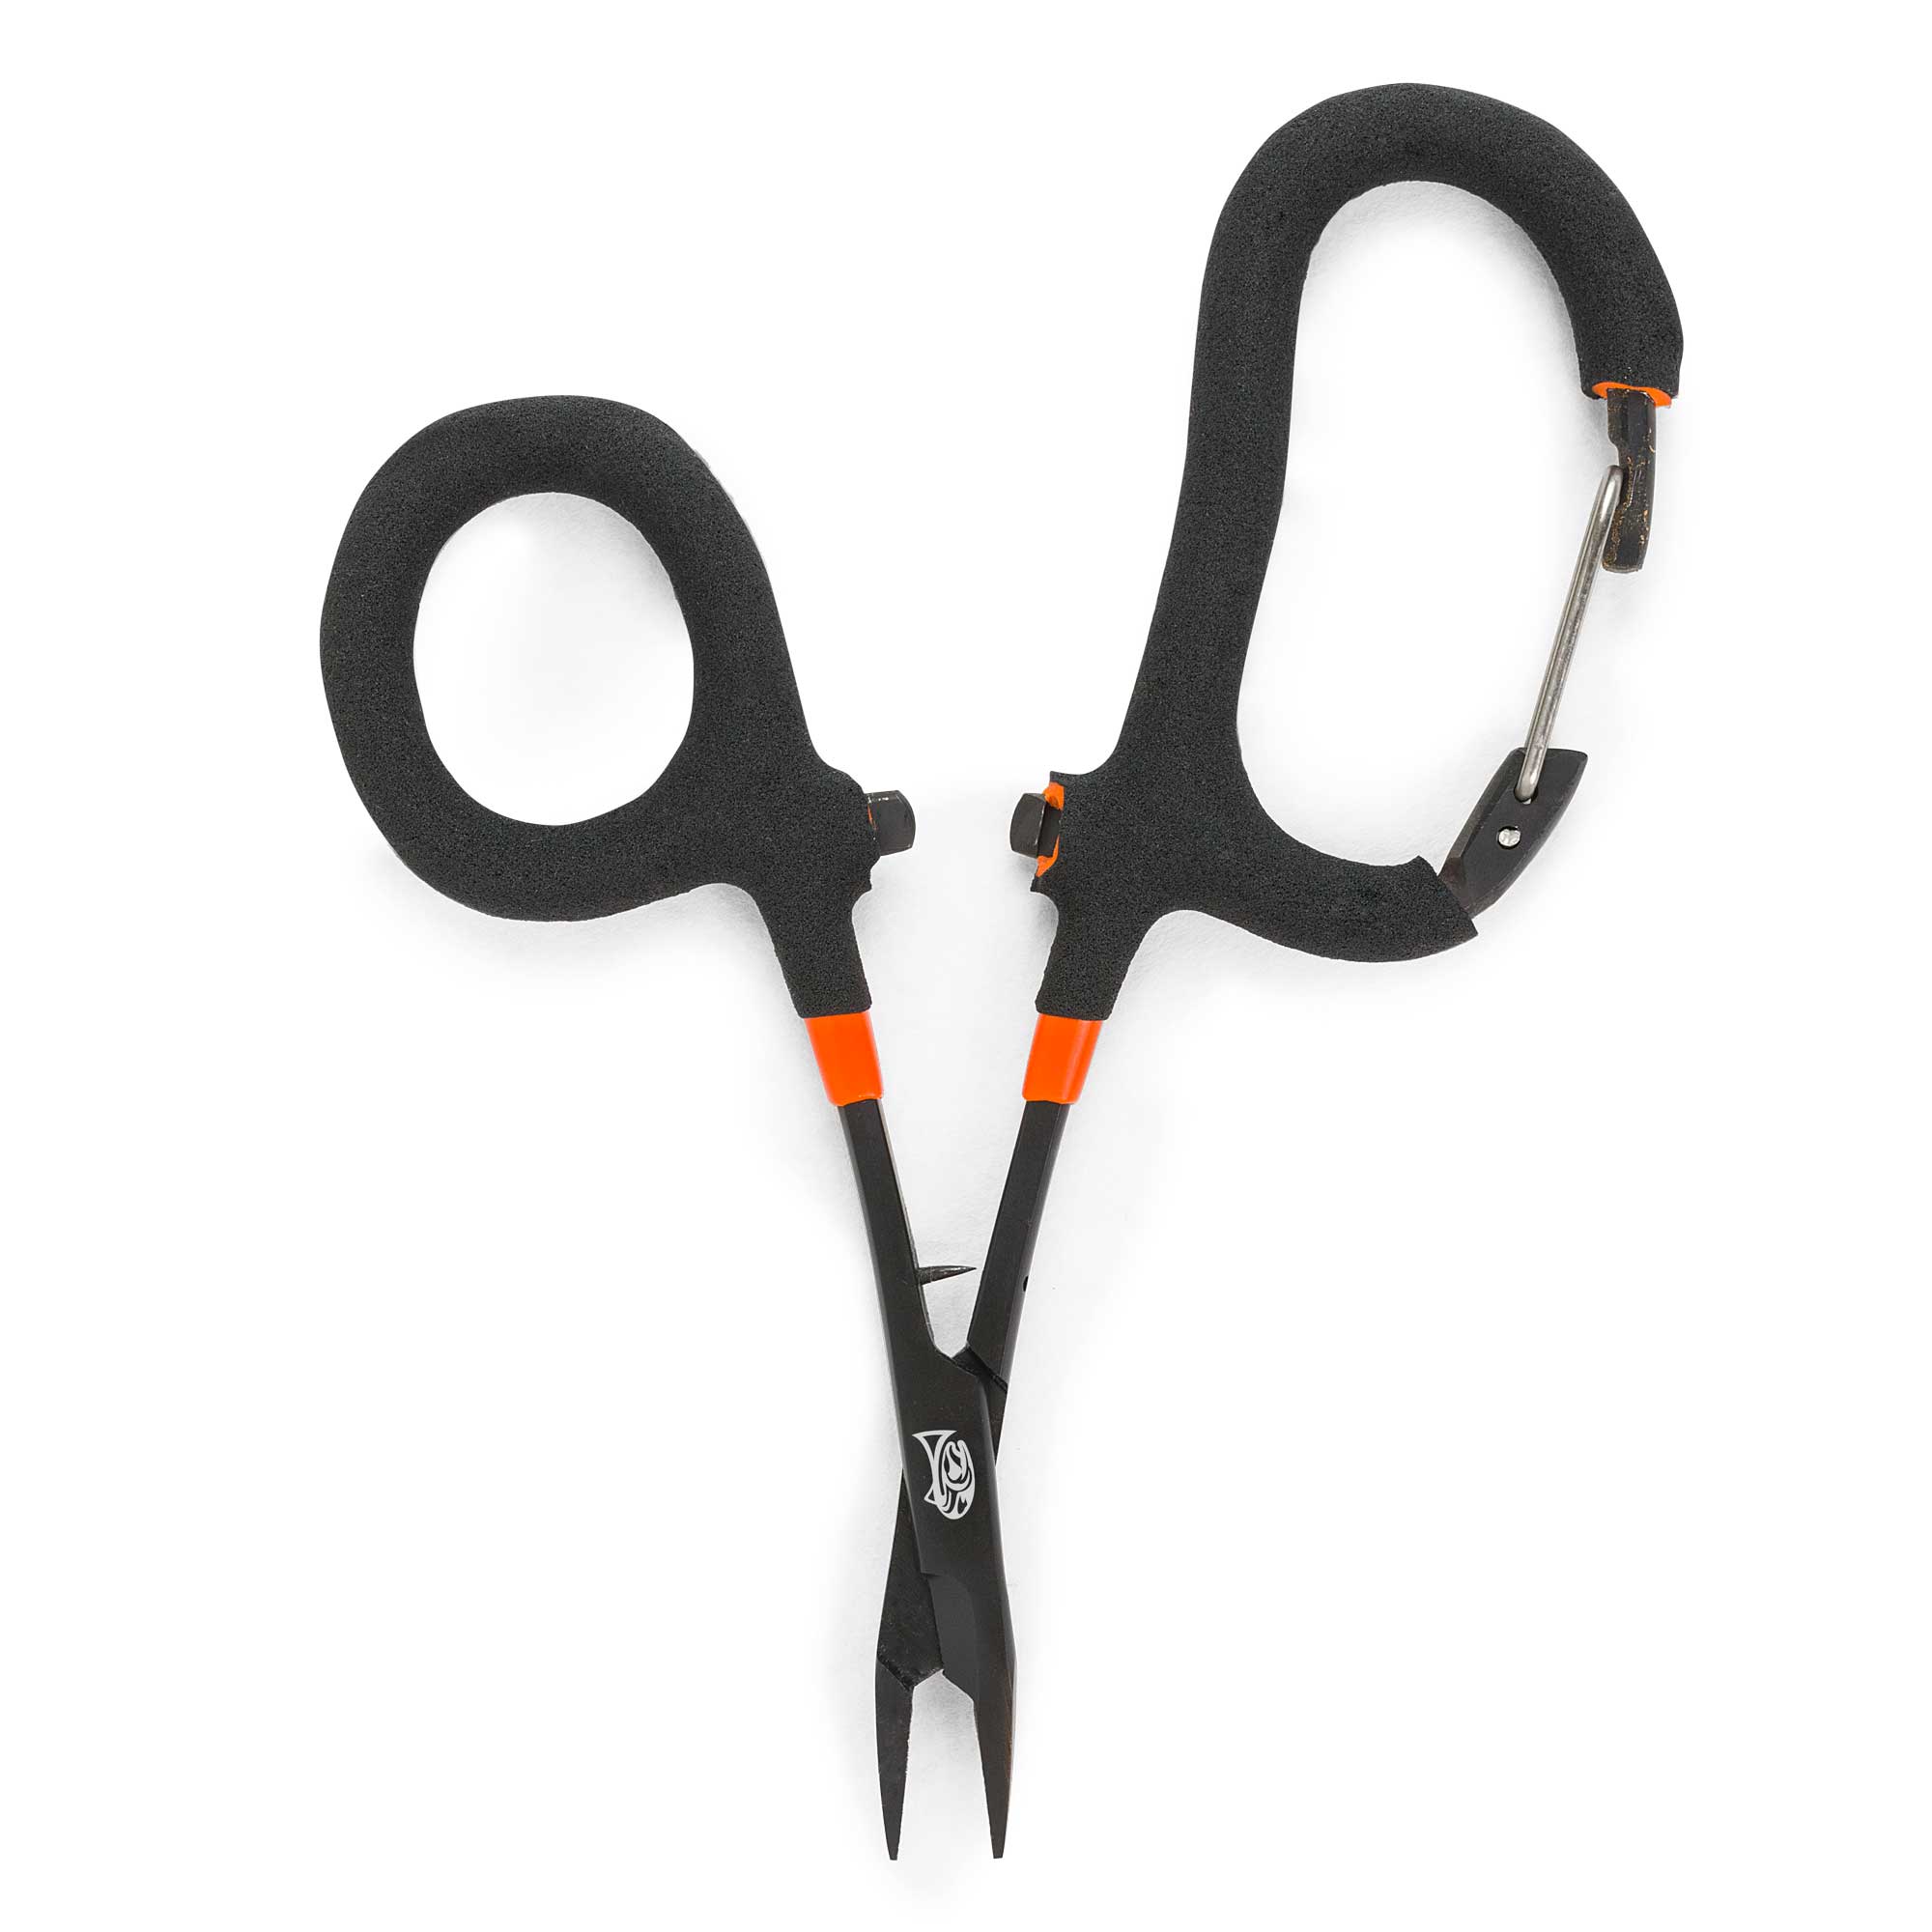 Stainless Steel Quick Knot Fishing Scissors Multifunctional Nippers For  Quick Tying, Line Cutting, And Snip Tackle Accessories From Emmagame1,  $2.47